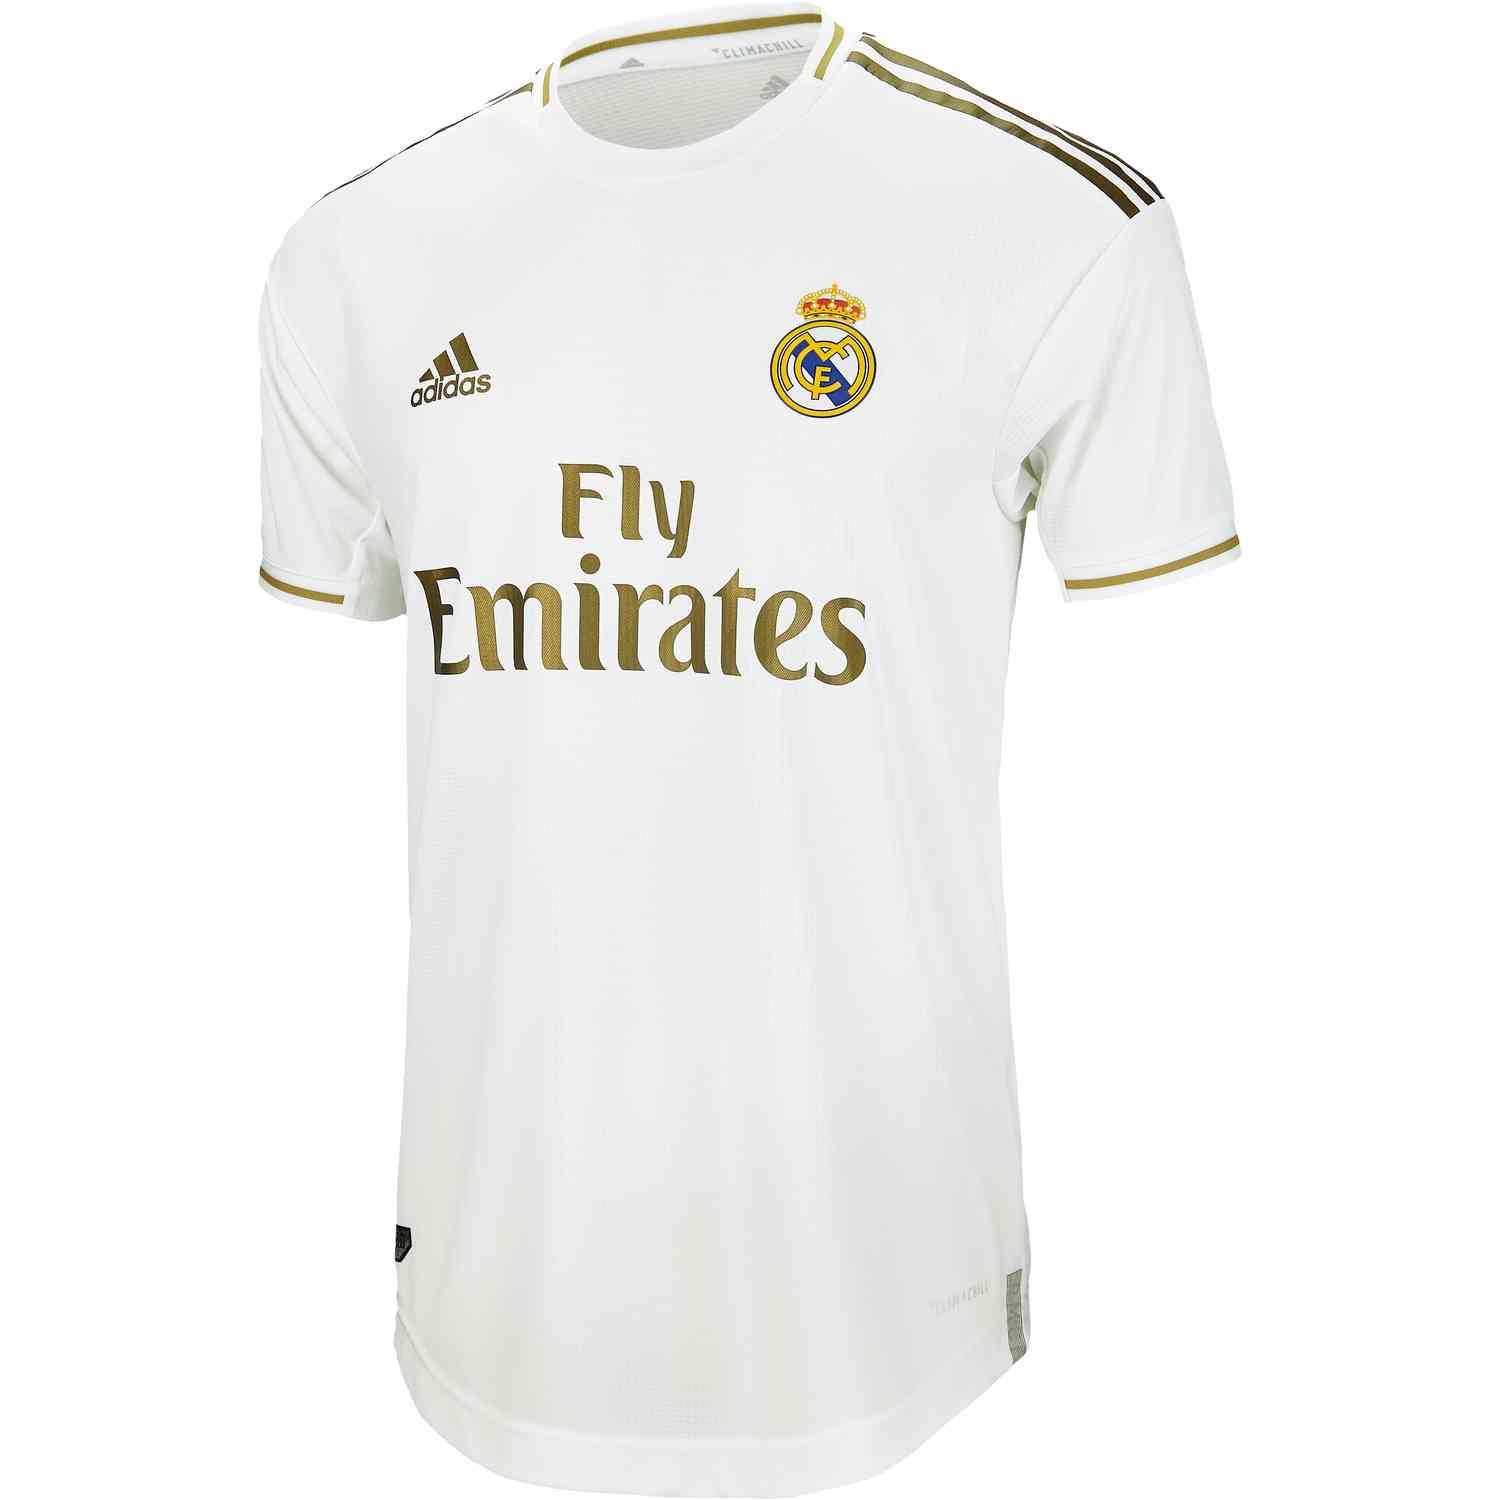 adidas authentic soccer jersey sizing